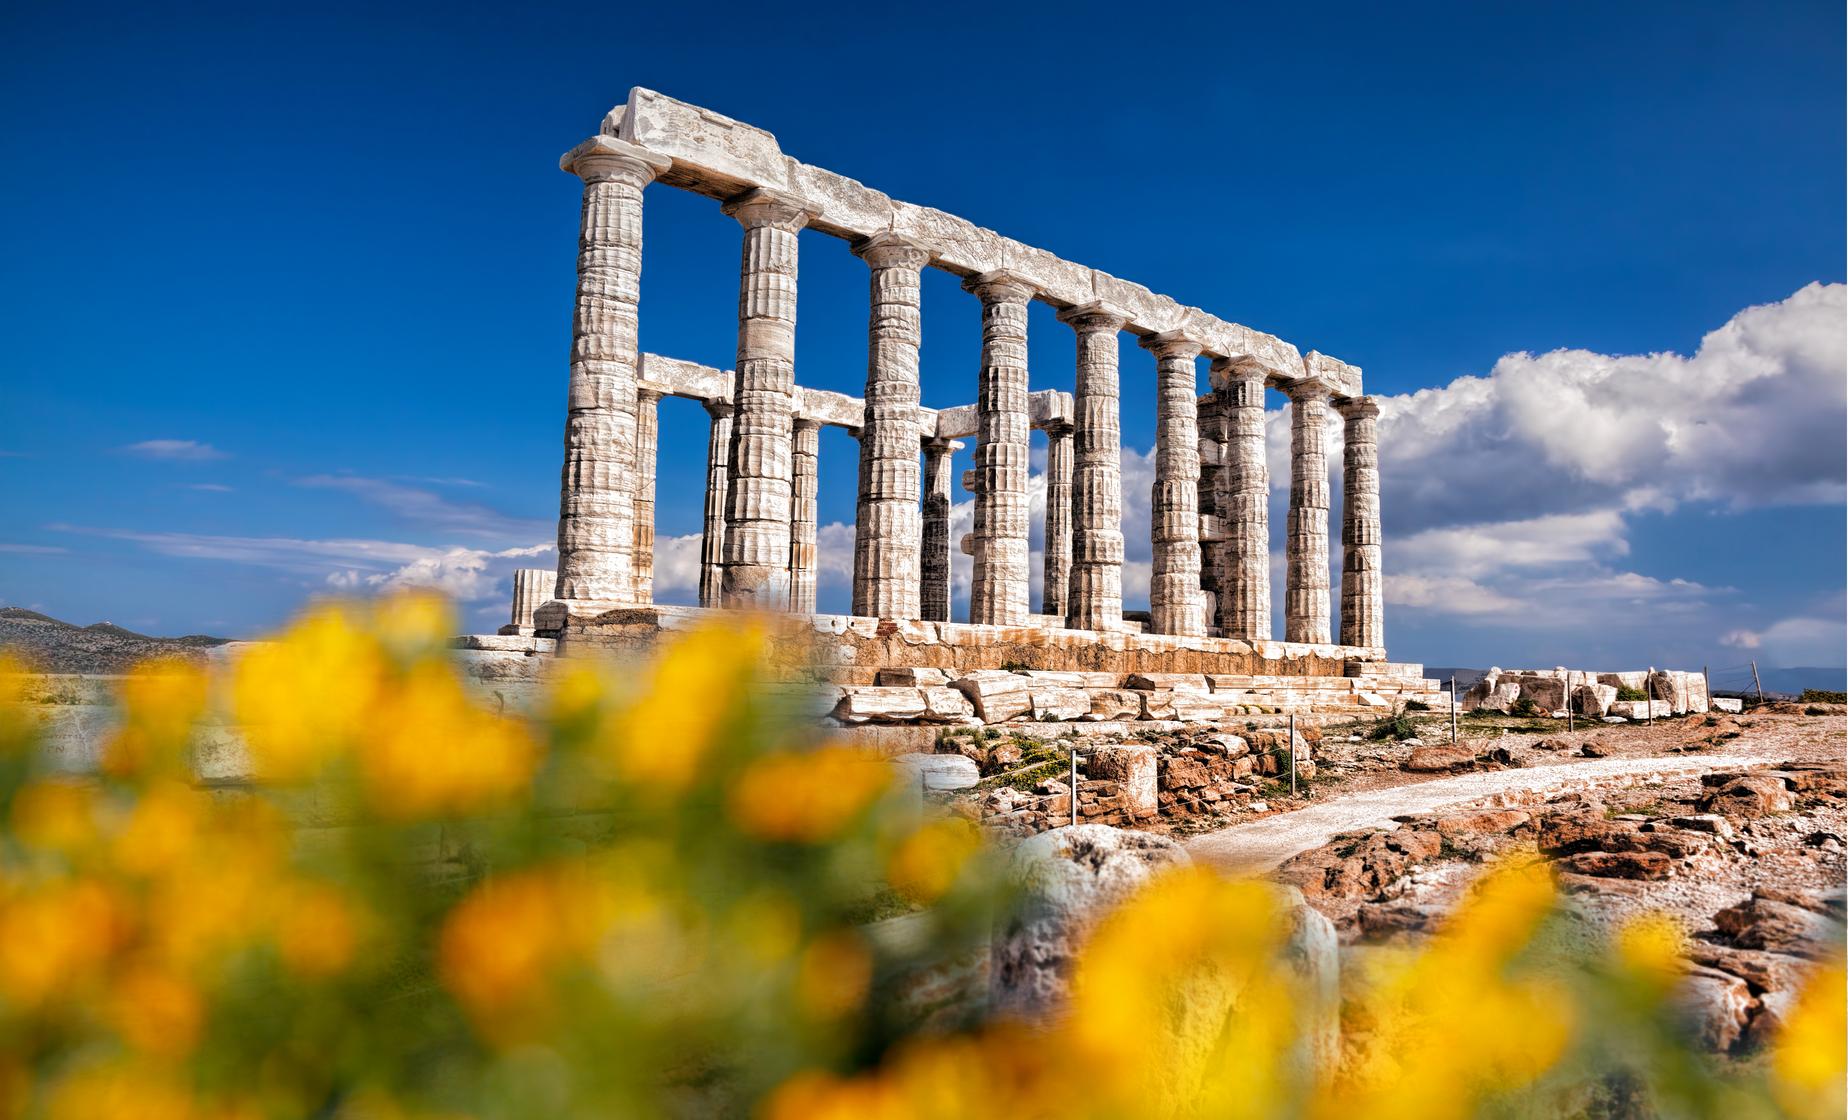 Cape Sounion Half Day Tour from Athens (Temple of Poseidon)